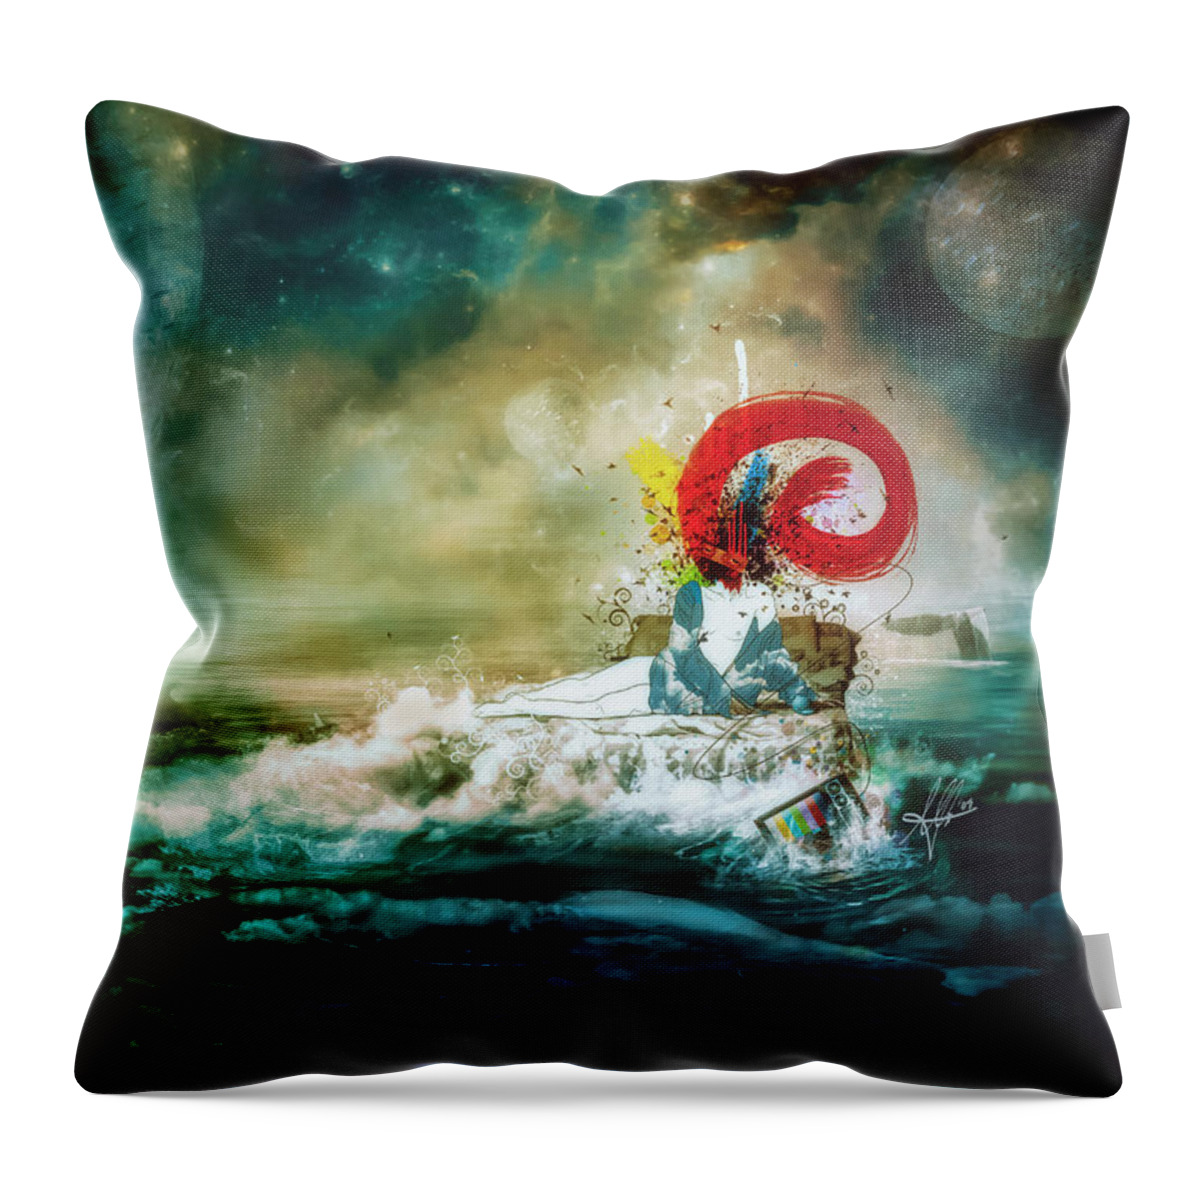 Surreal Throw Pillow featuring the digital art The traffic of the whales by Mario Sanchez Nevado